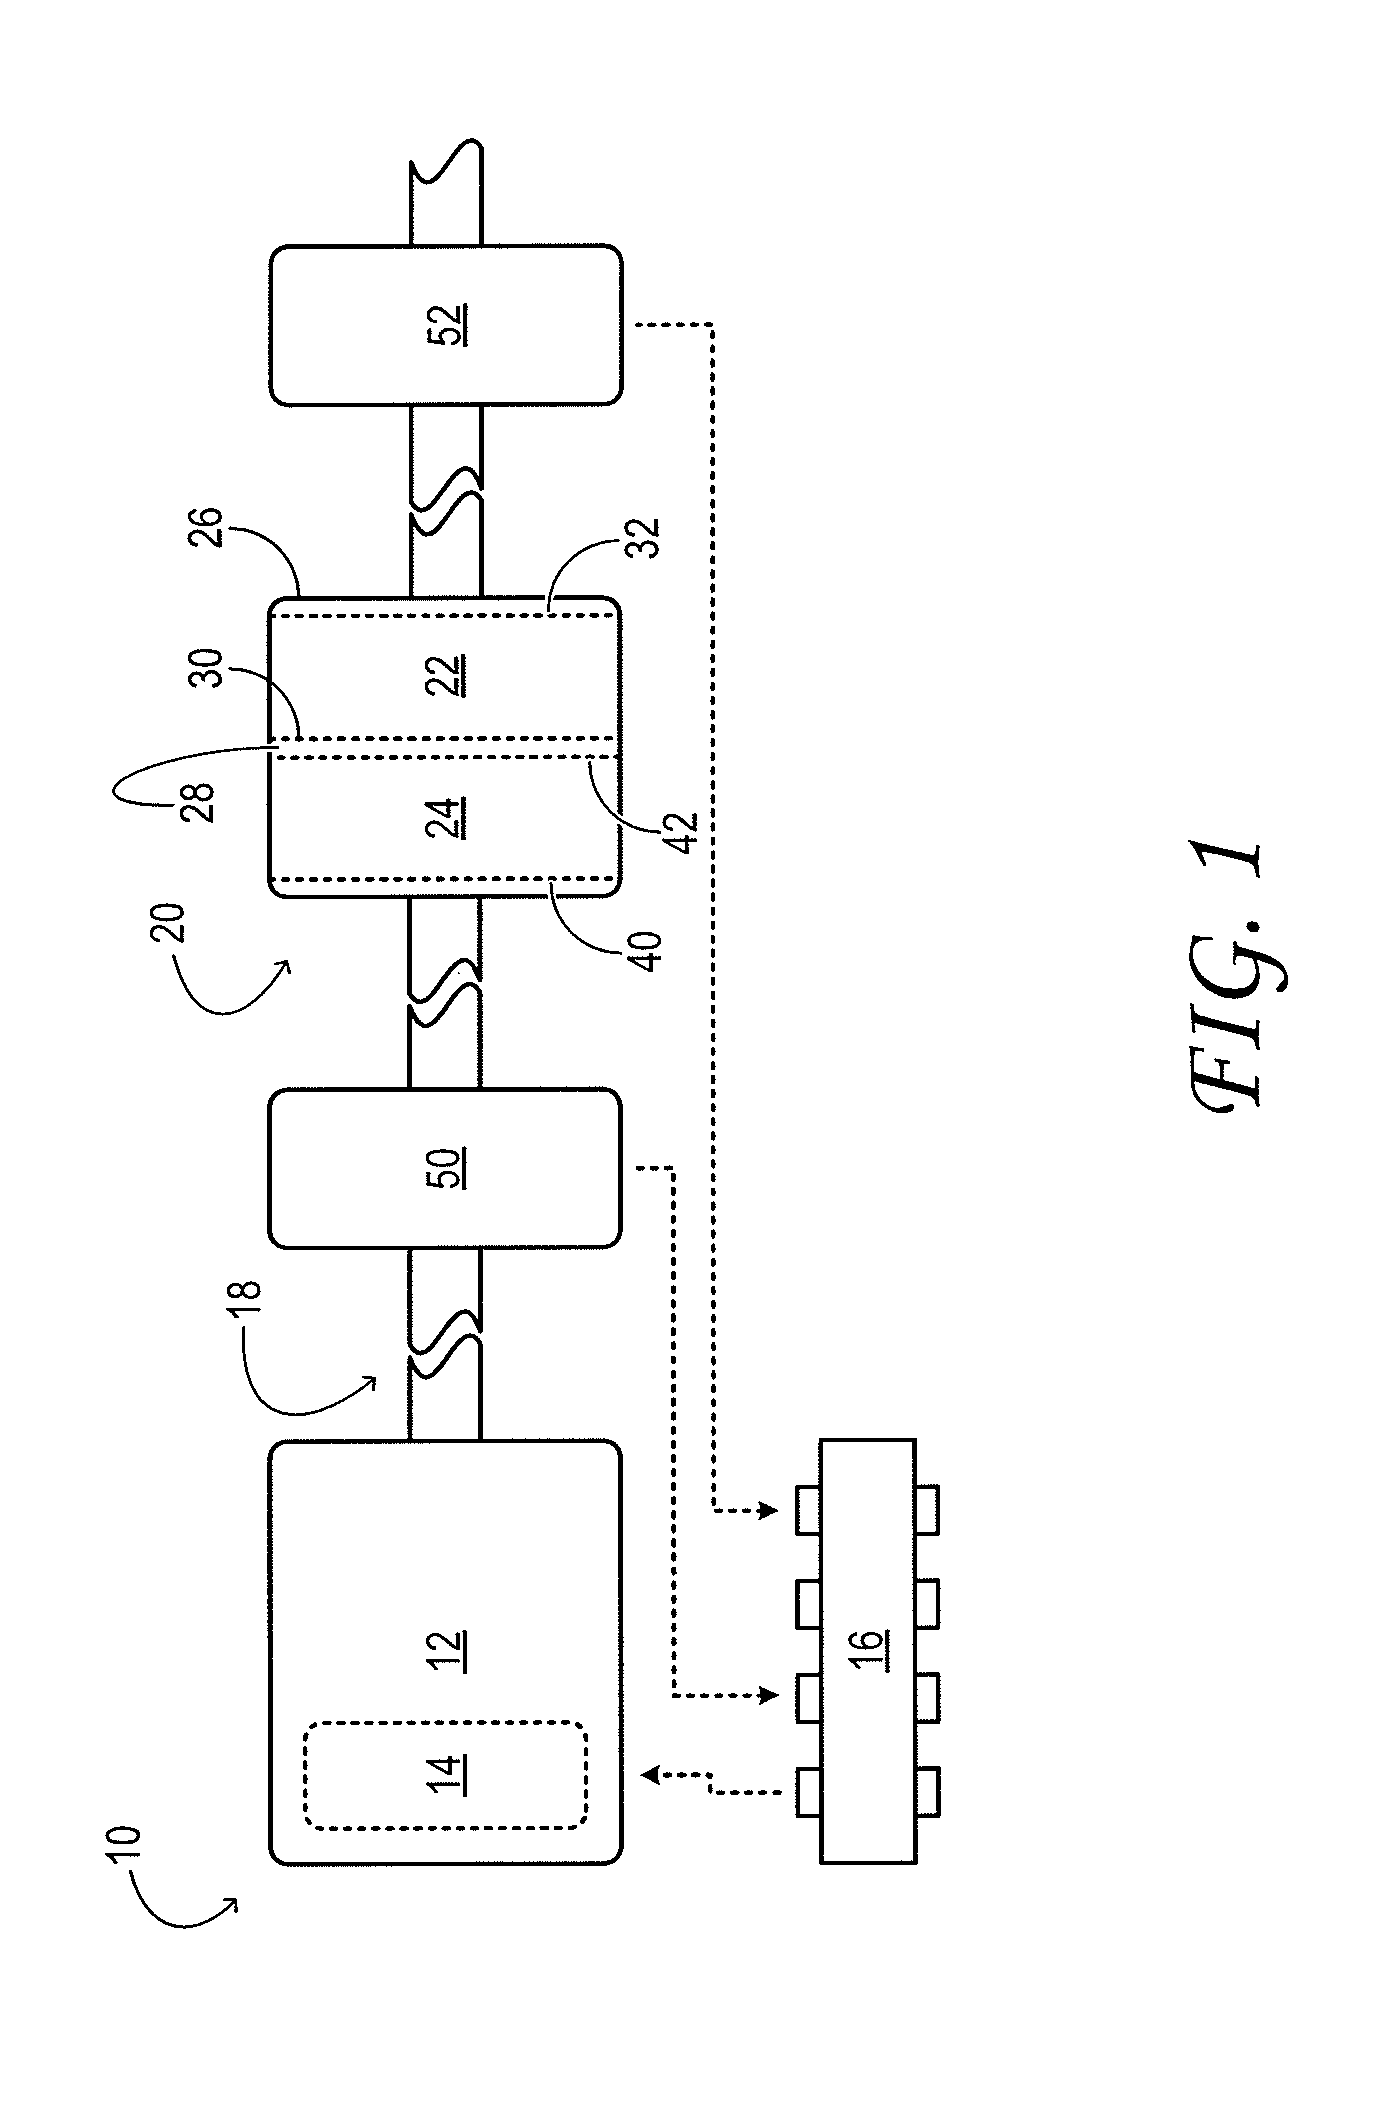 Even-loading DPF and regeneration thereof